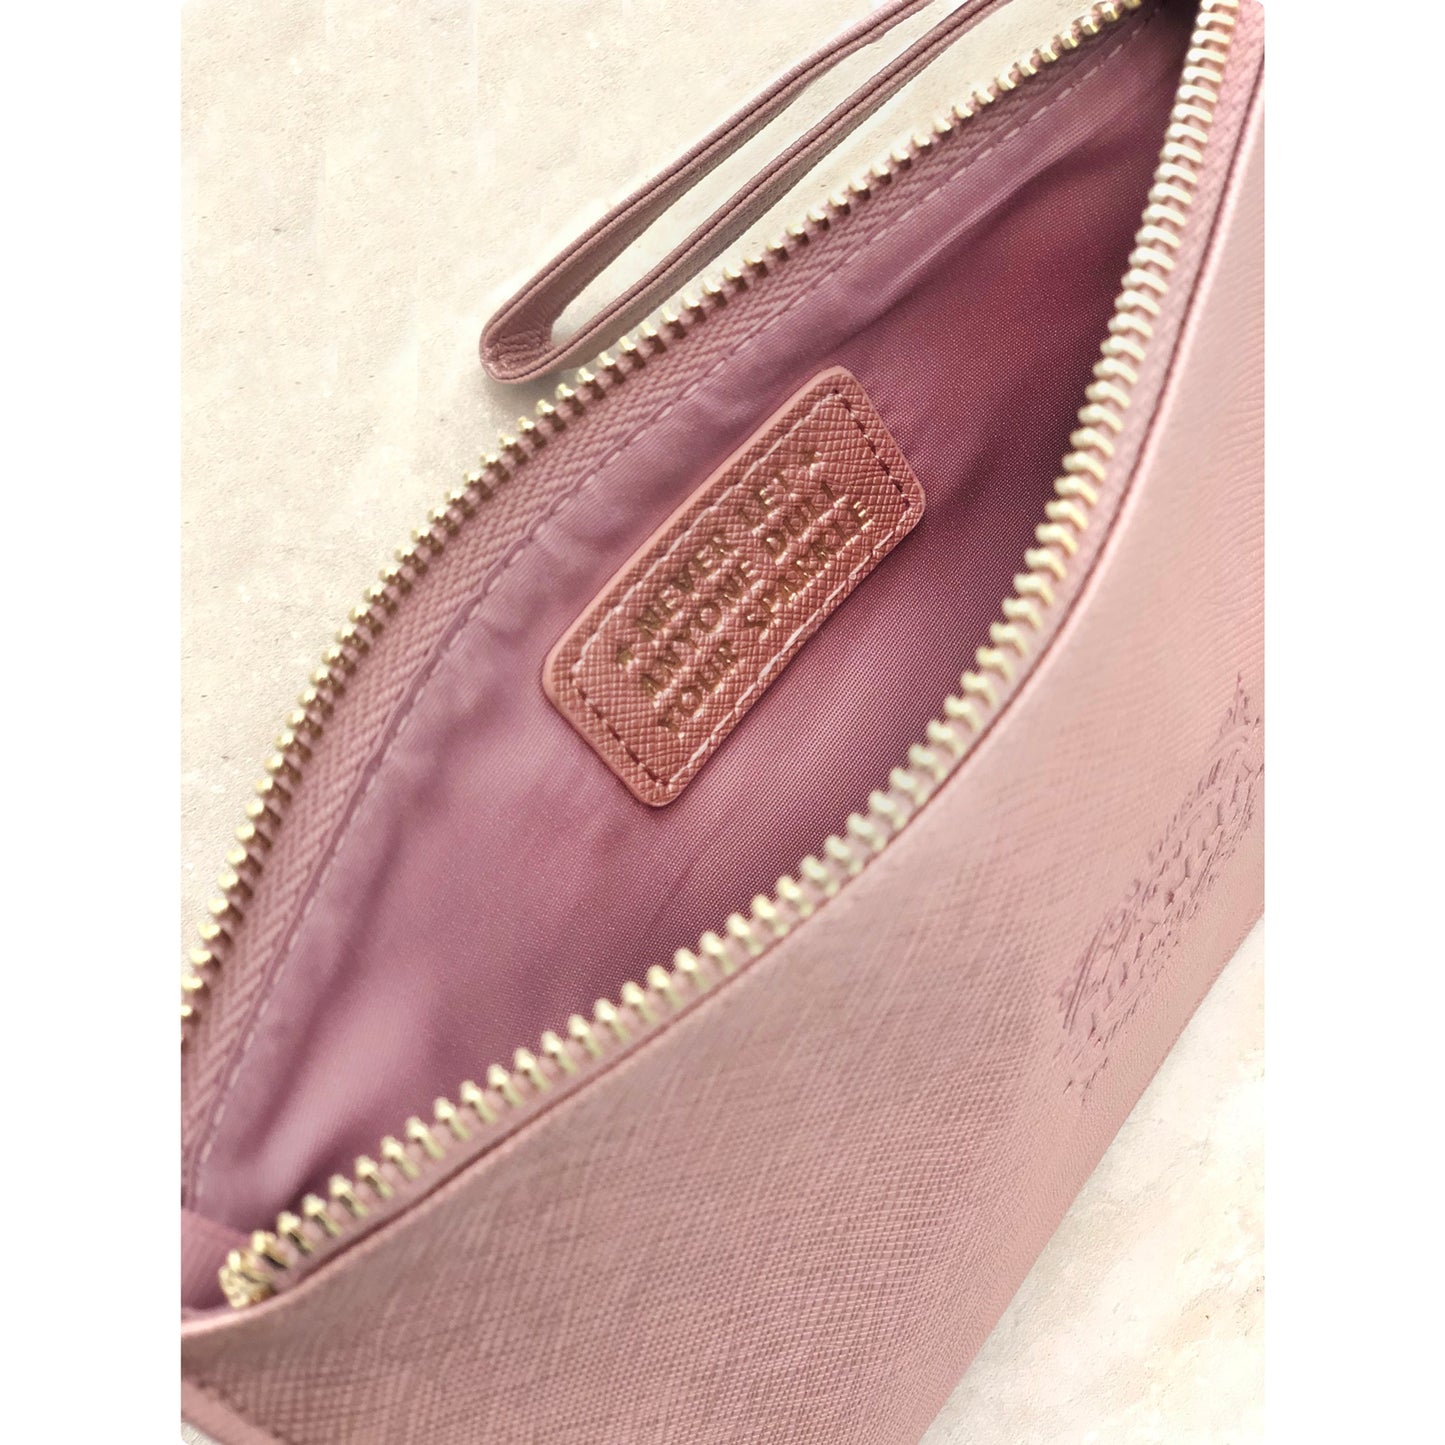 Clutch Bag With Handle & Embossed Text "Why fit in when you were born to stand out!"